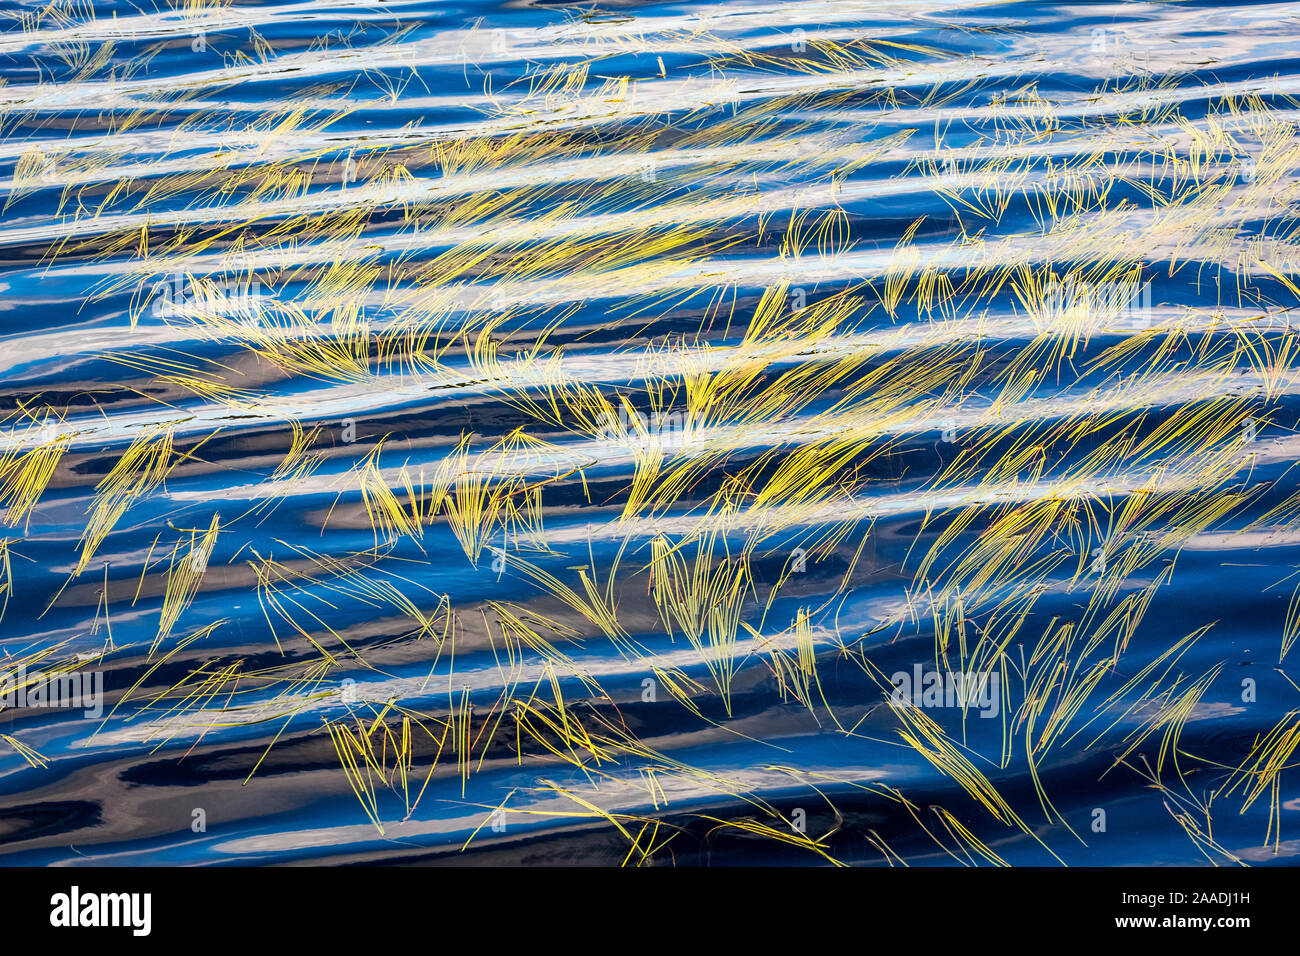 Floating sweet-grass (Glyceria fluitans) in lake, Bjornlandet National Park, North Sweden. Finalist in the Plants and Fungi category of the Wildlife Photographer of the Year Awards (WPOY) Competition 2017. Stock Photo